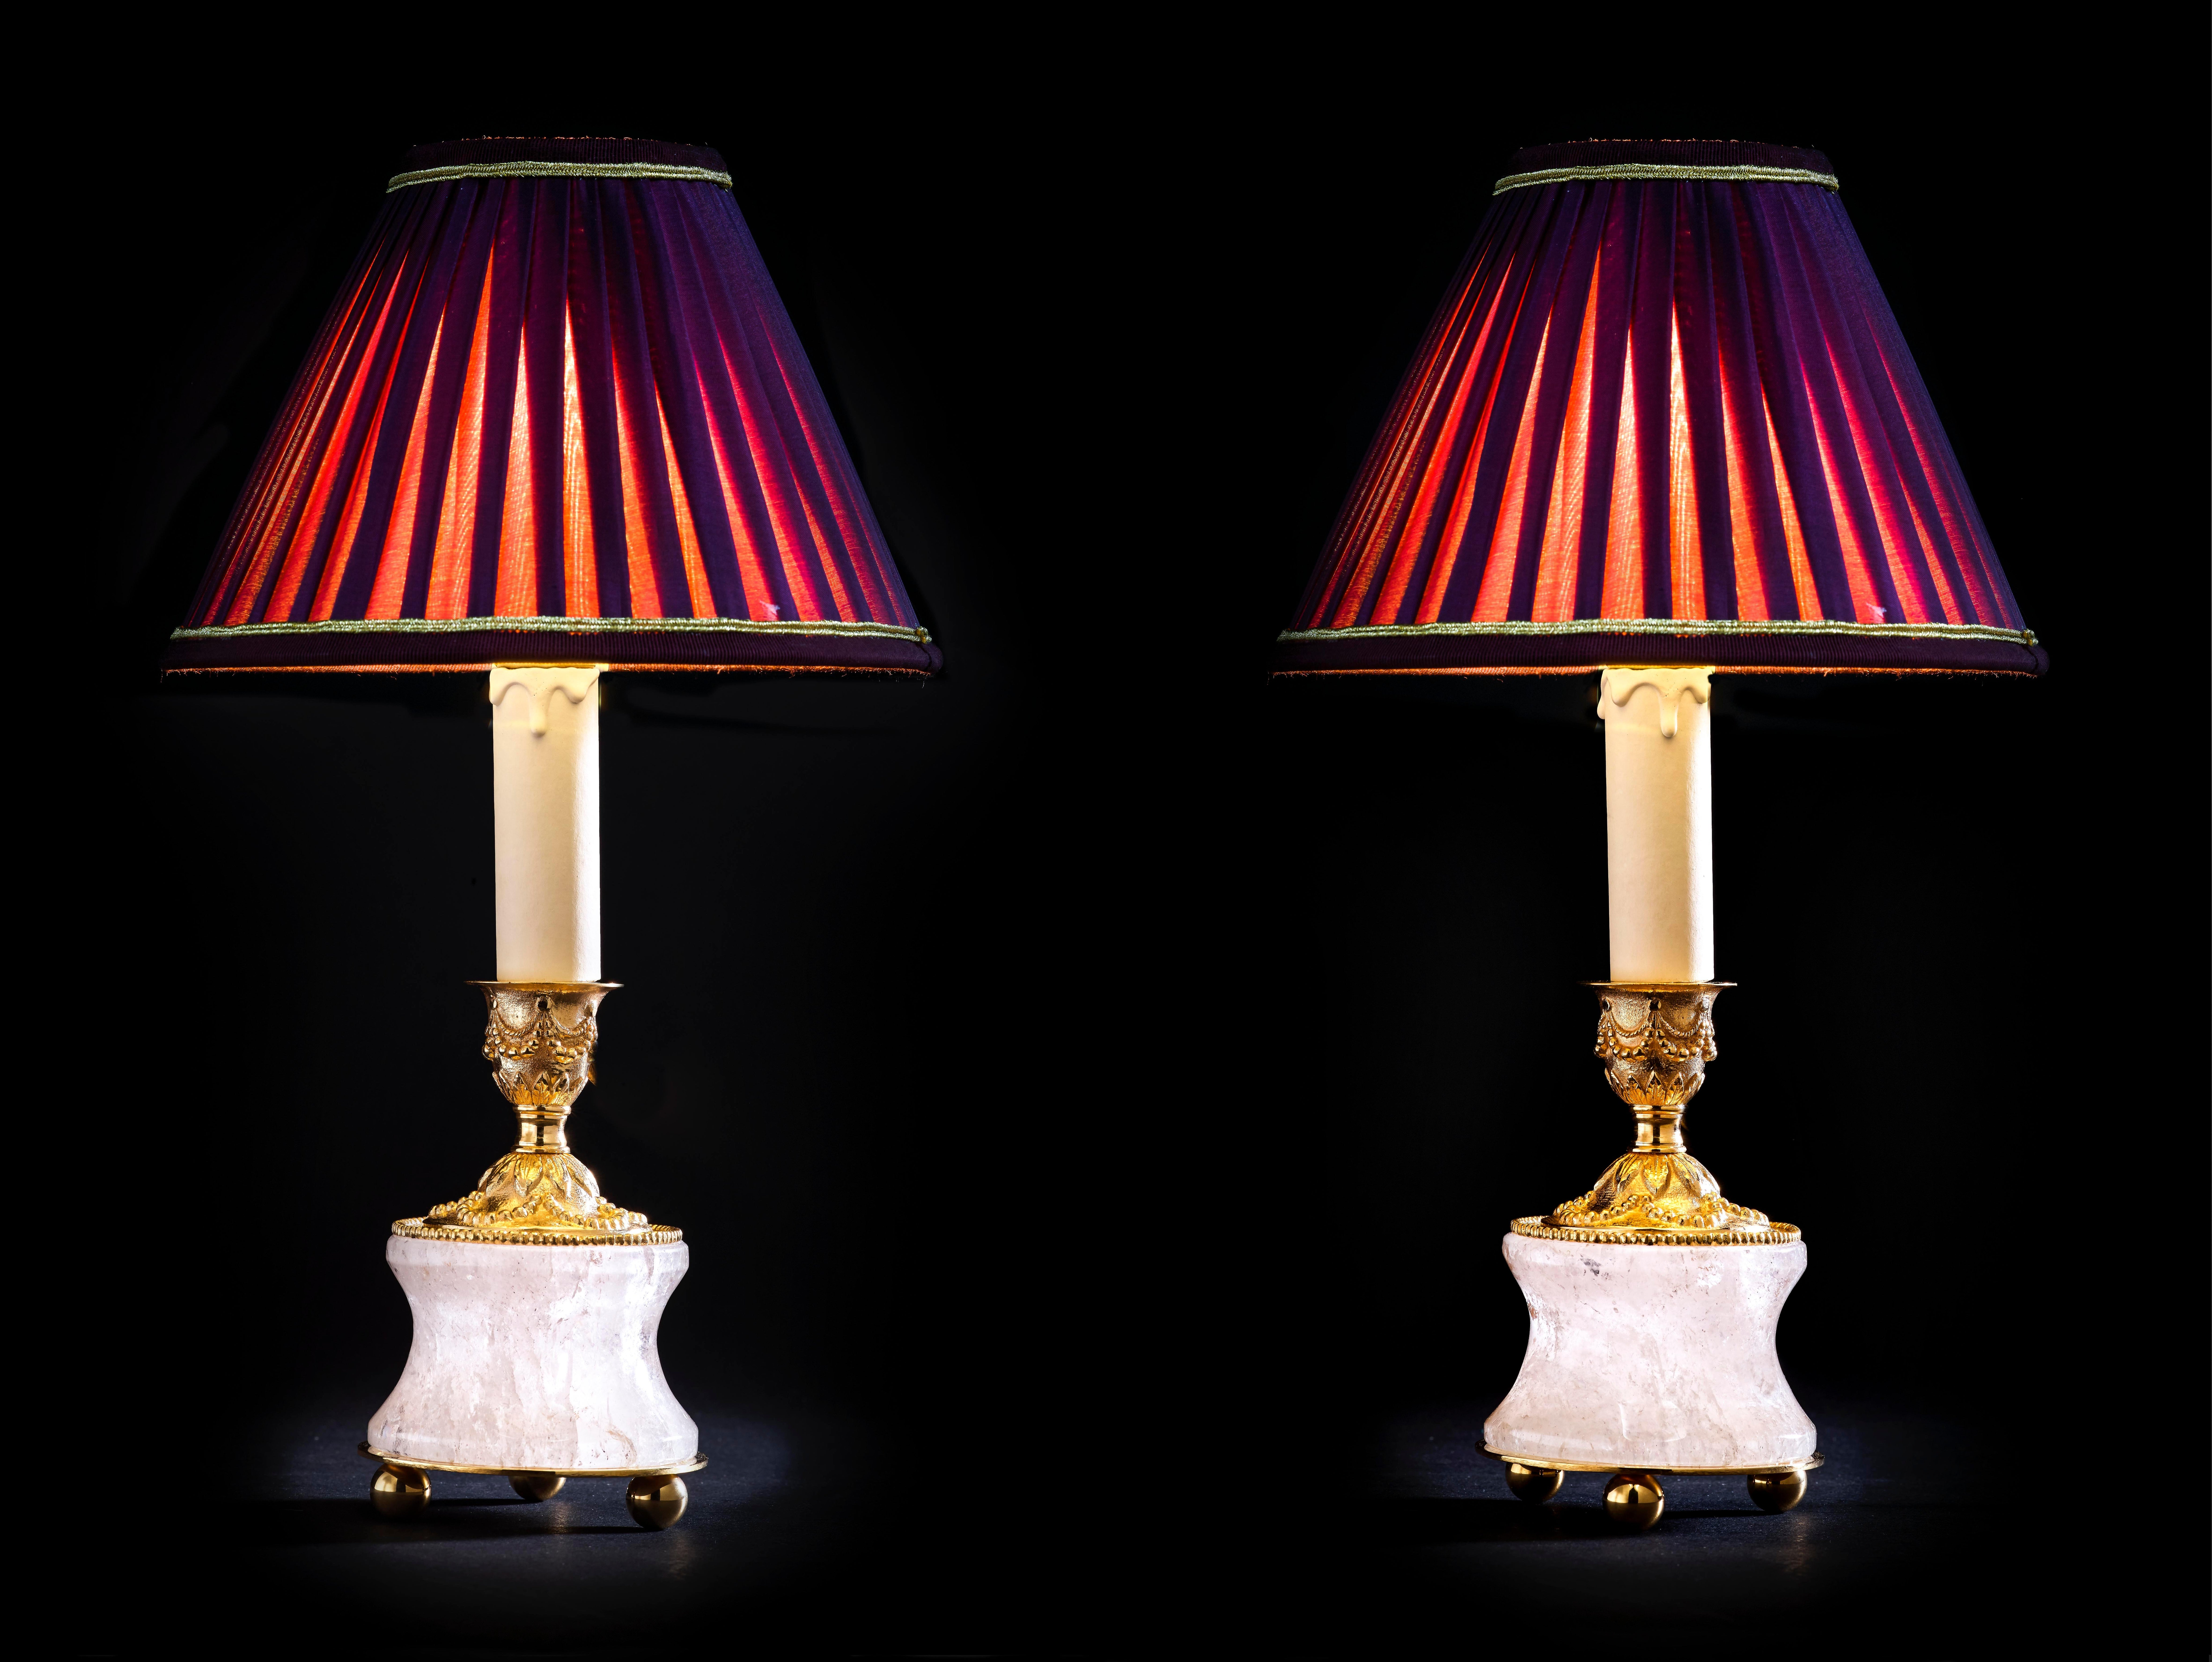 Rock Crystal Louis XVI style 24-karat ormolu gilding bronze purple lampshades made by Alexandre Vossion.
This model can be also used as candlesticks to make your dining table so chic.
Others colors for the lampshades are also available and three